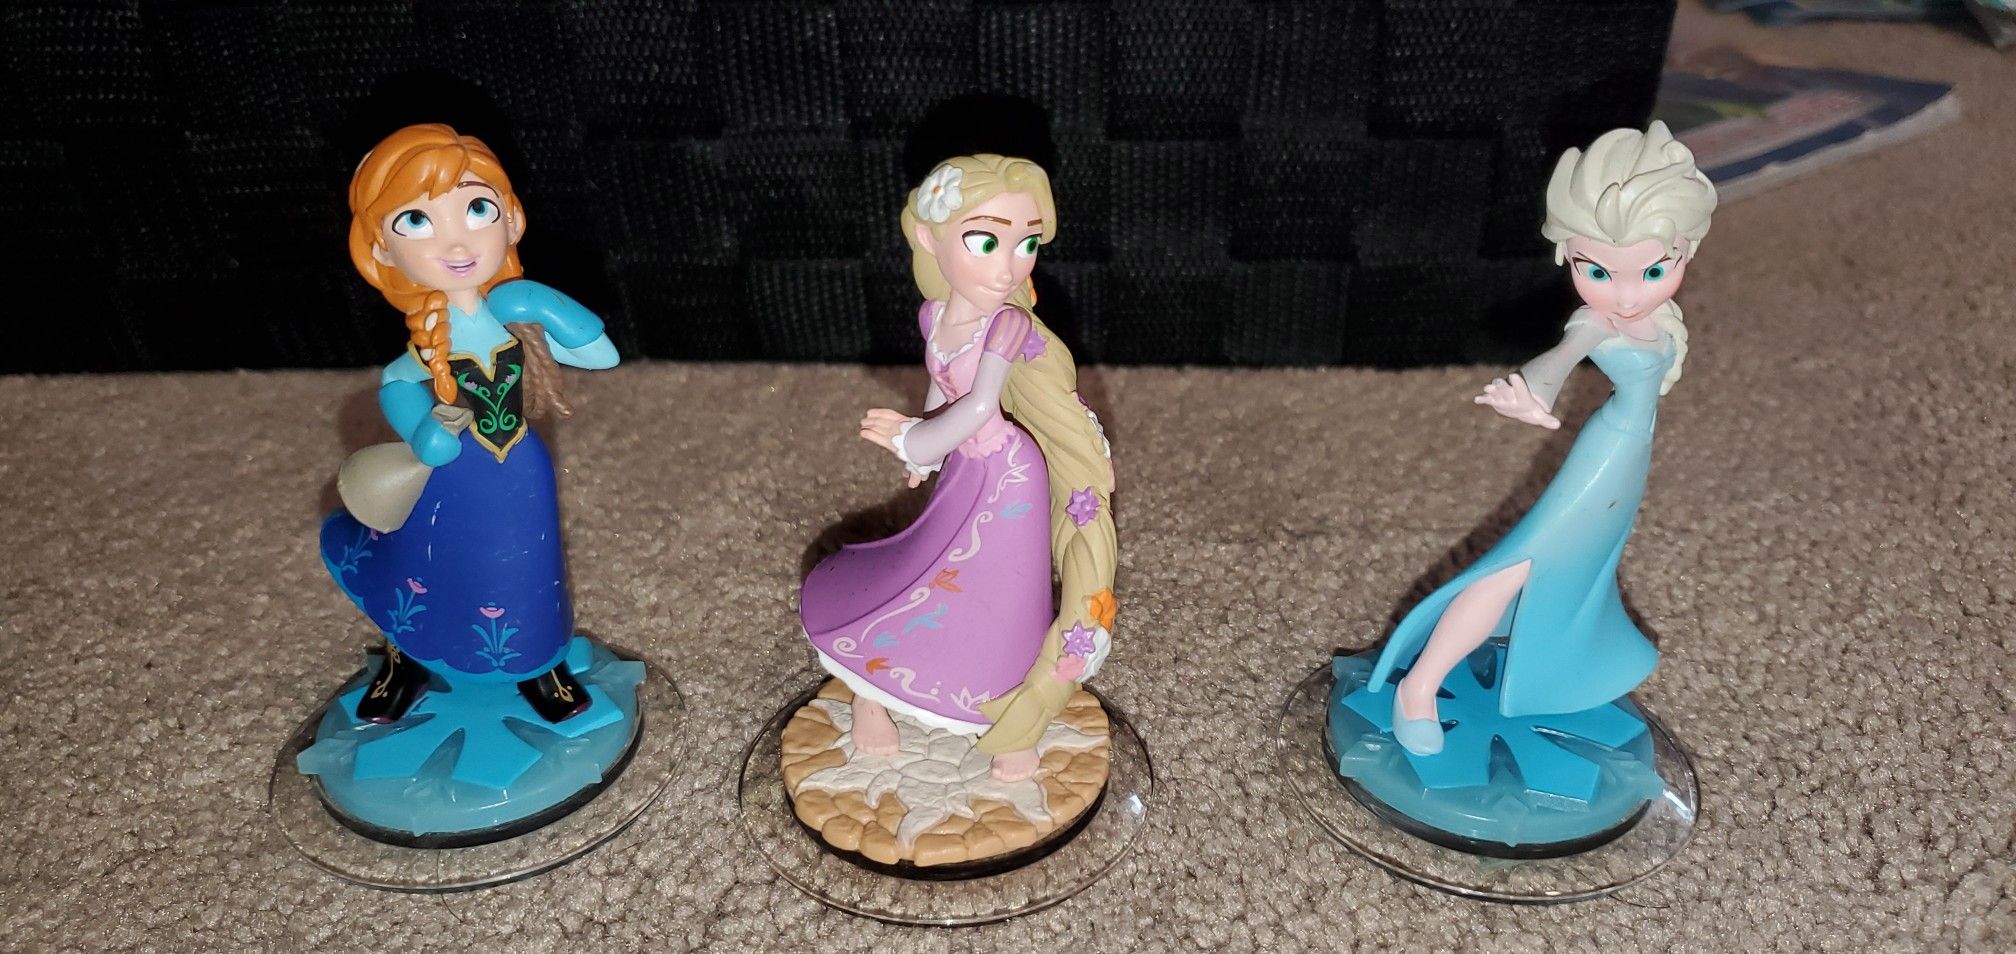 Disney Infinity Characters 1.0 and 3.0